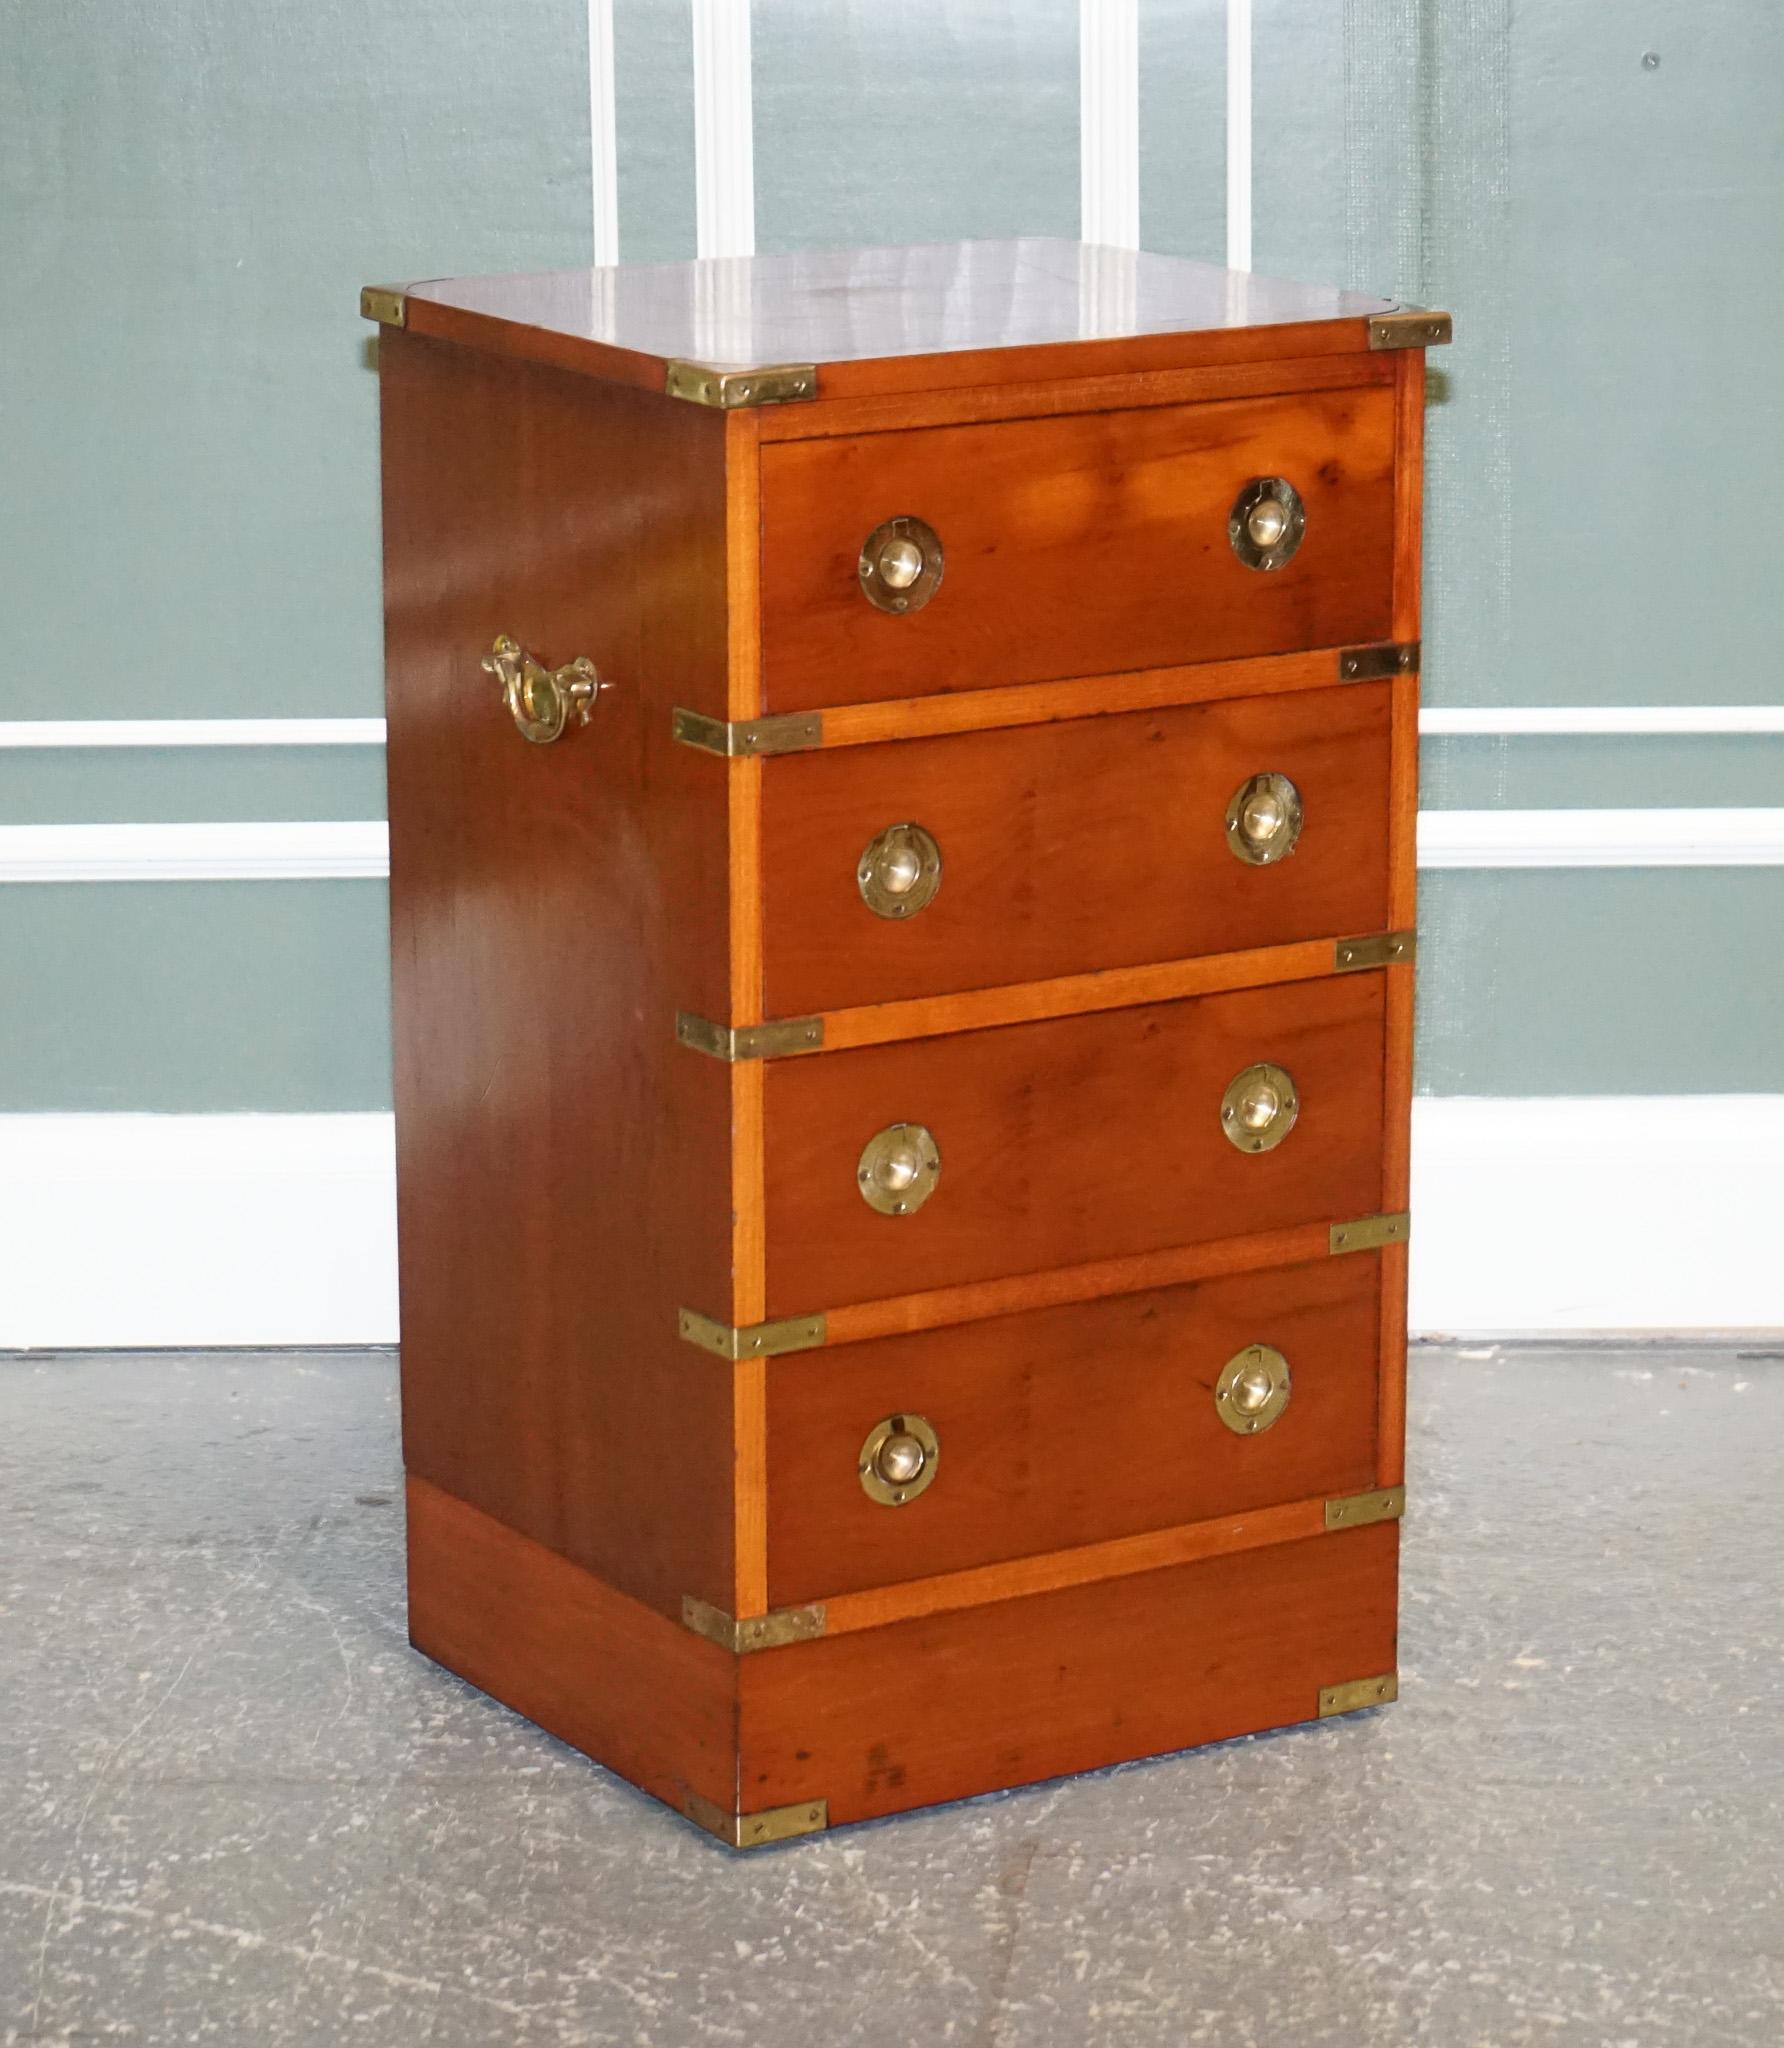 We are excited to present this vintage yew wood military campaign chest of drawers.

Beautiful chest of drawers with all the original brass fittings.
It's made from yew wood which always looks stunning after a good polish.
It has four drawers